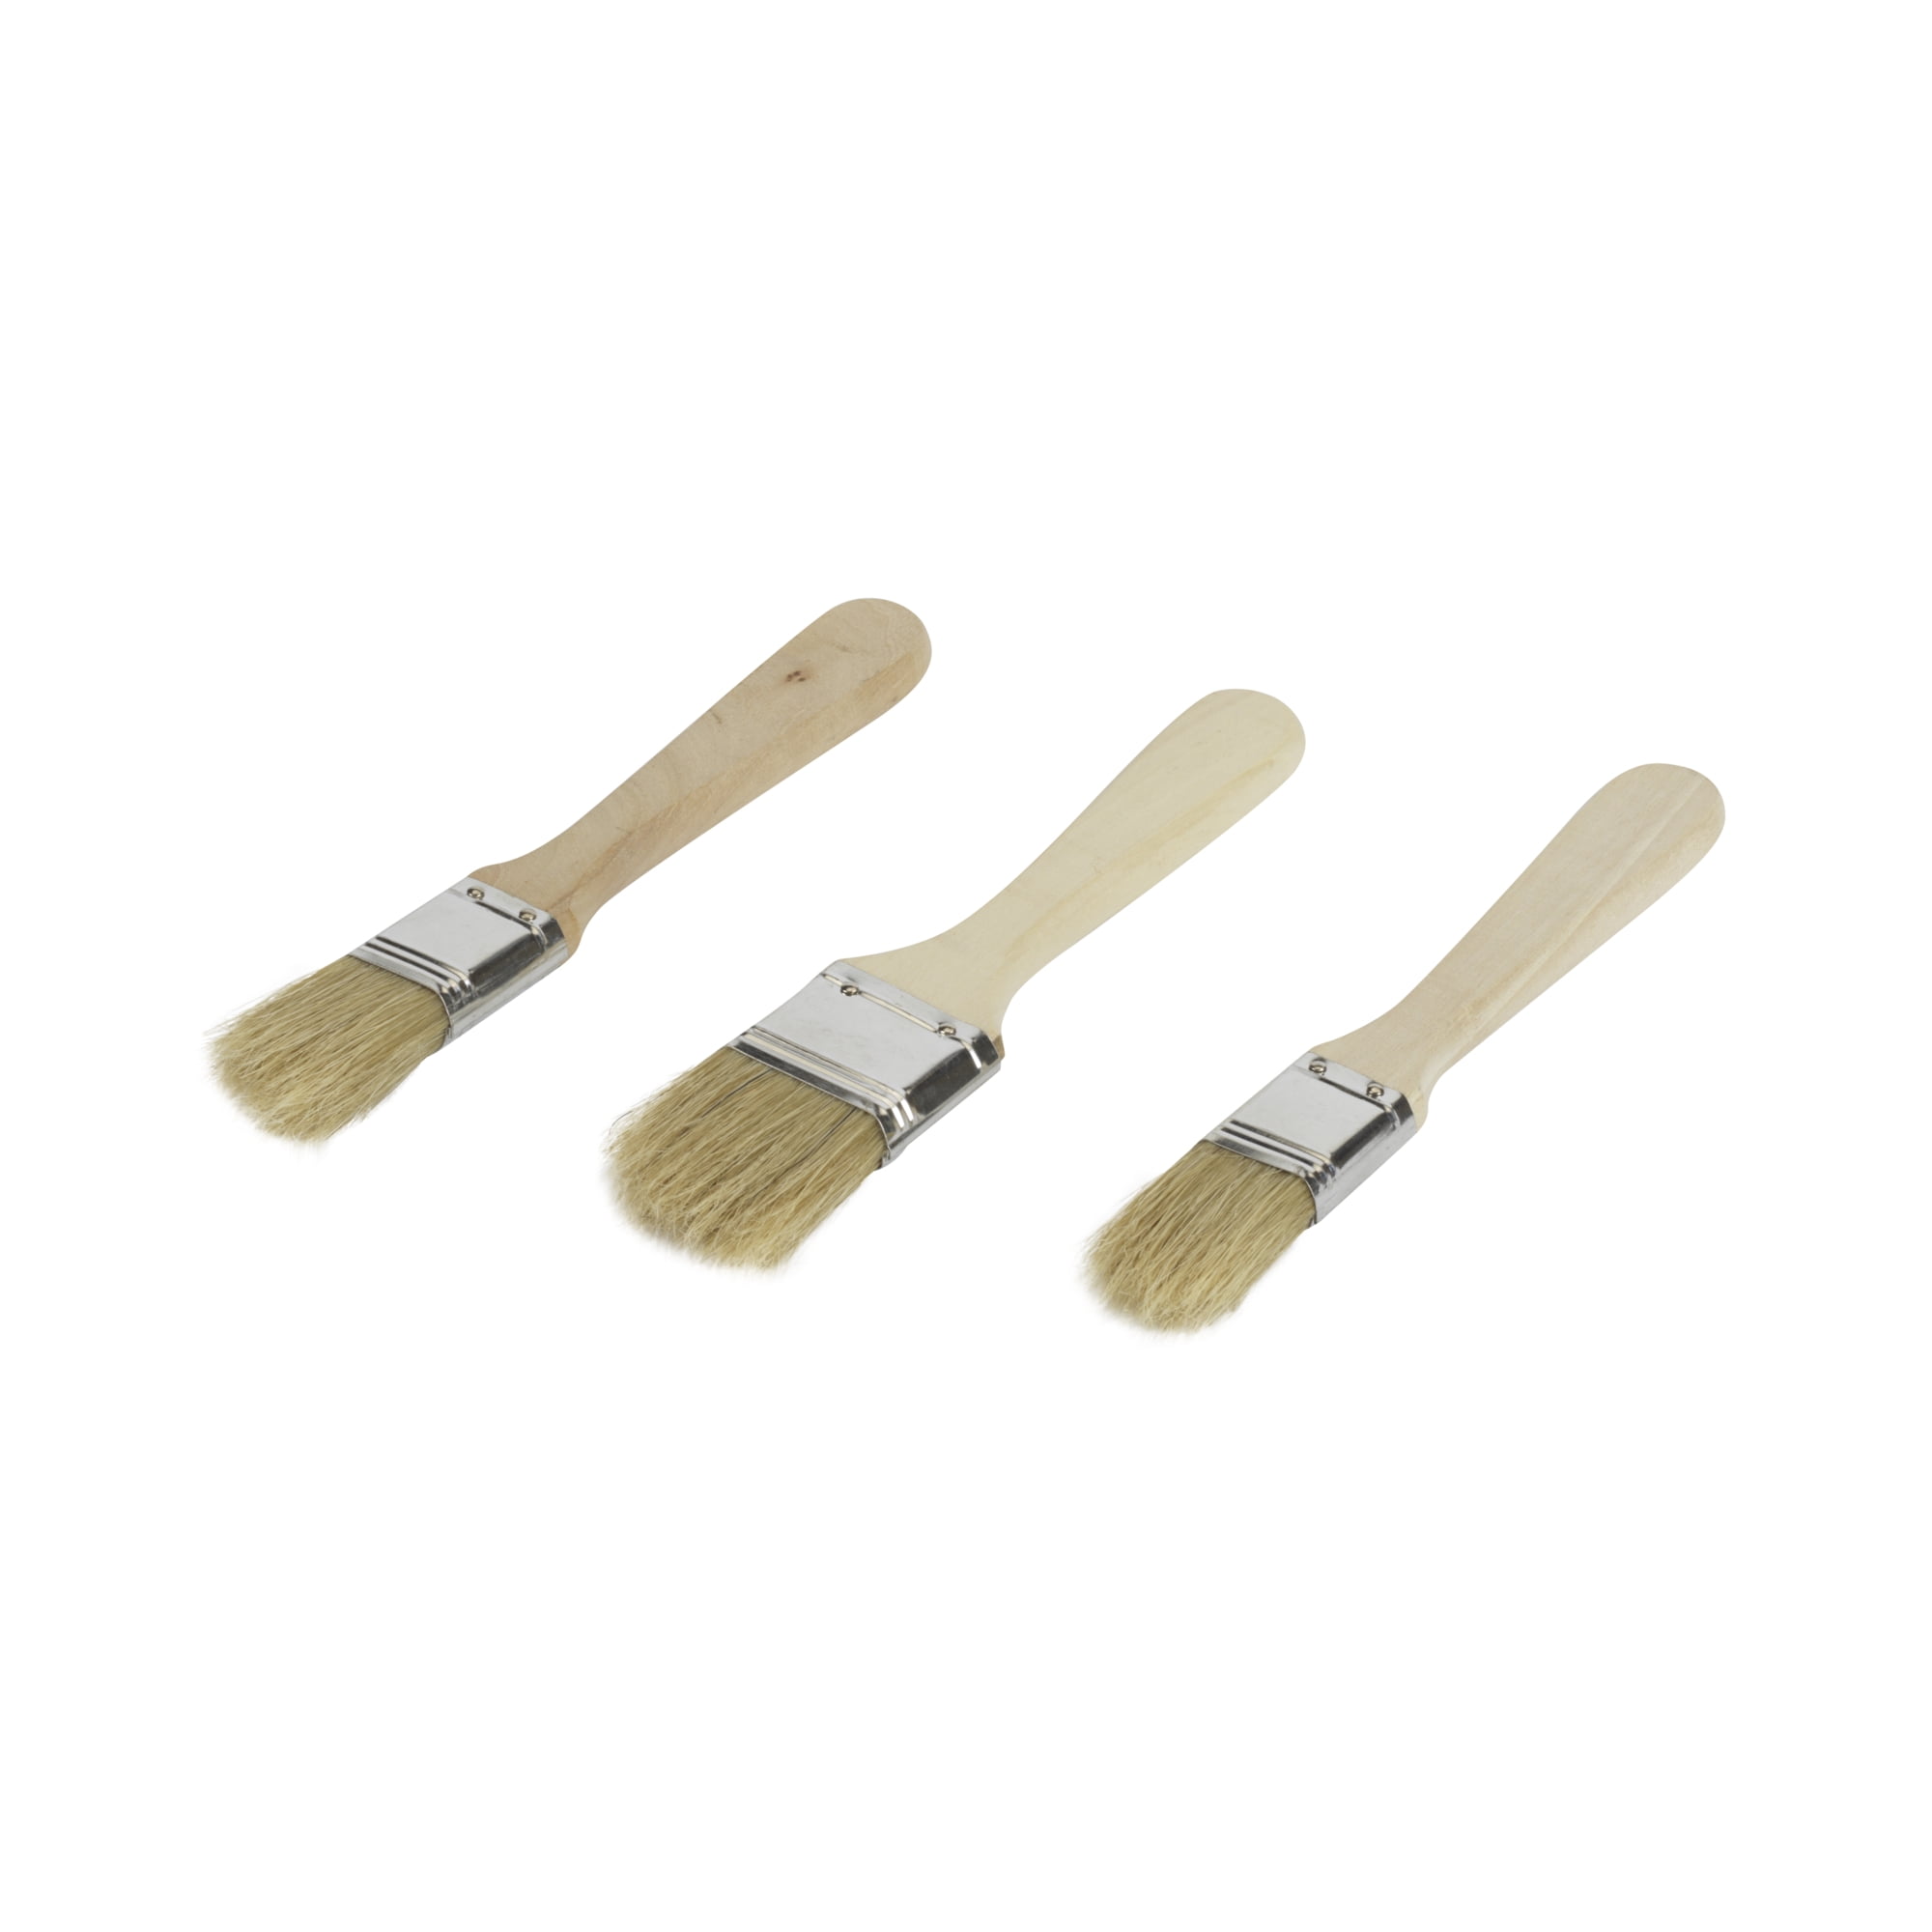 US$ 6.98 - Gold Basting Brush, Kitchen Brush For Cooking With